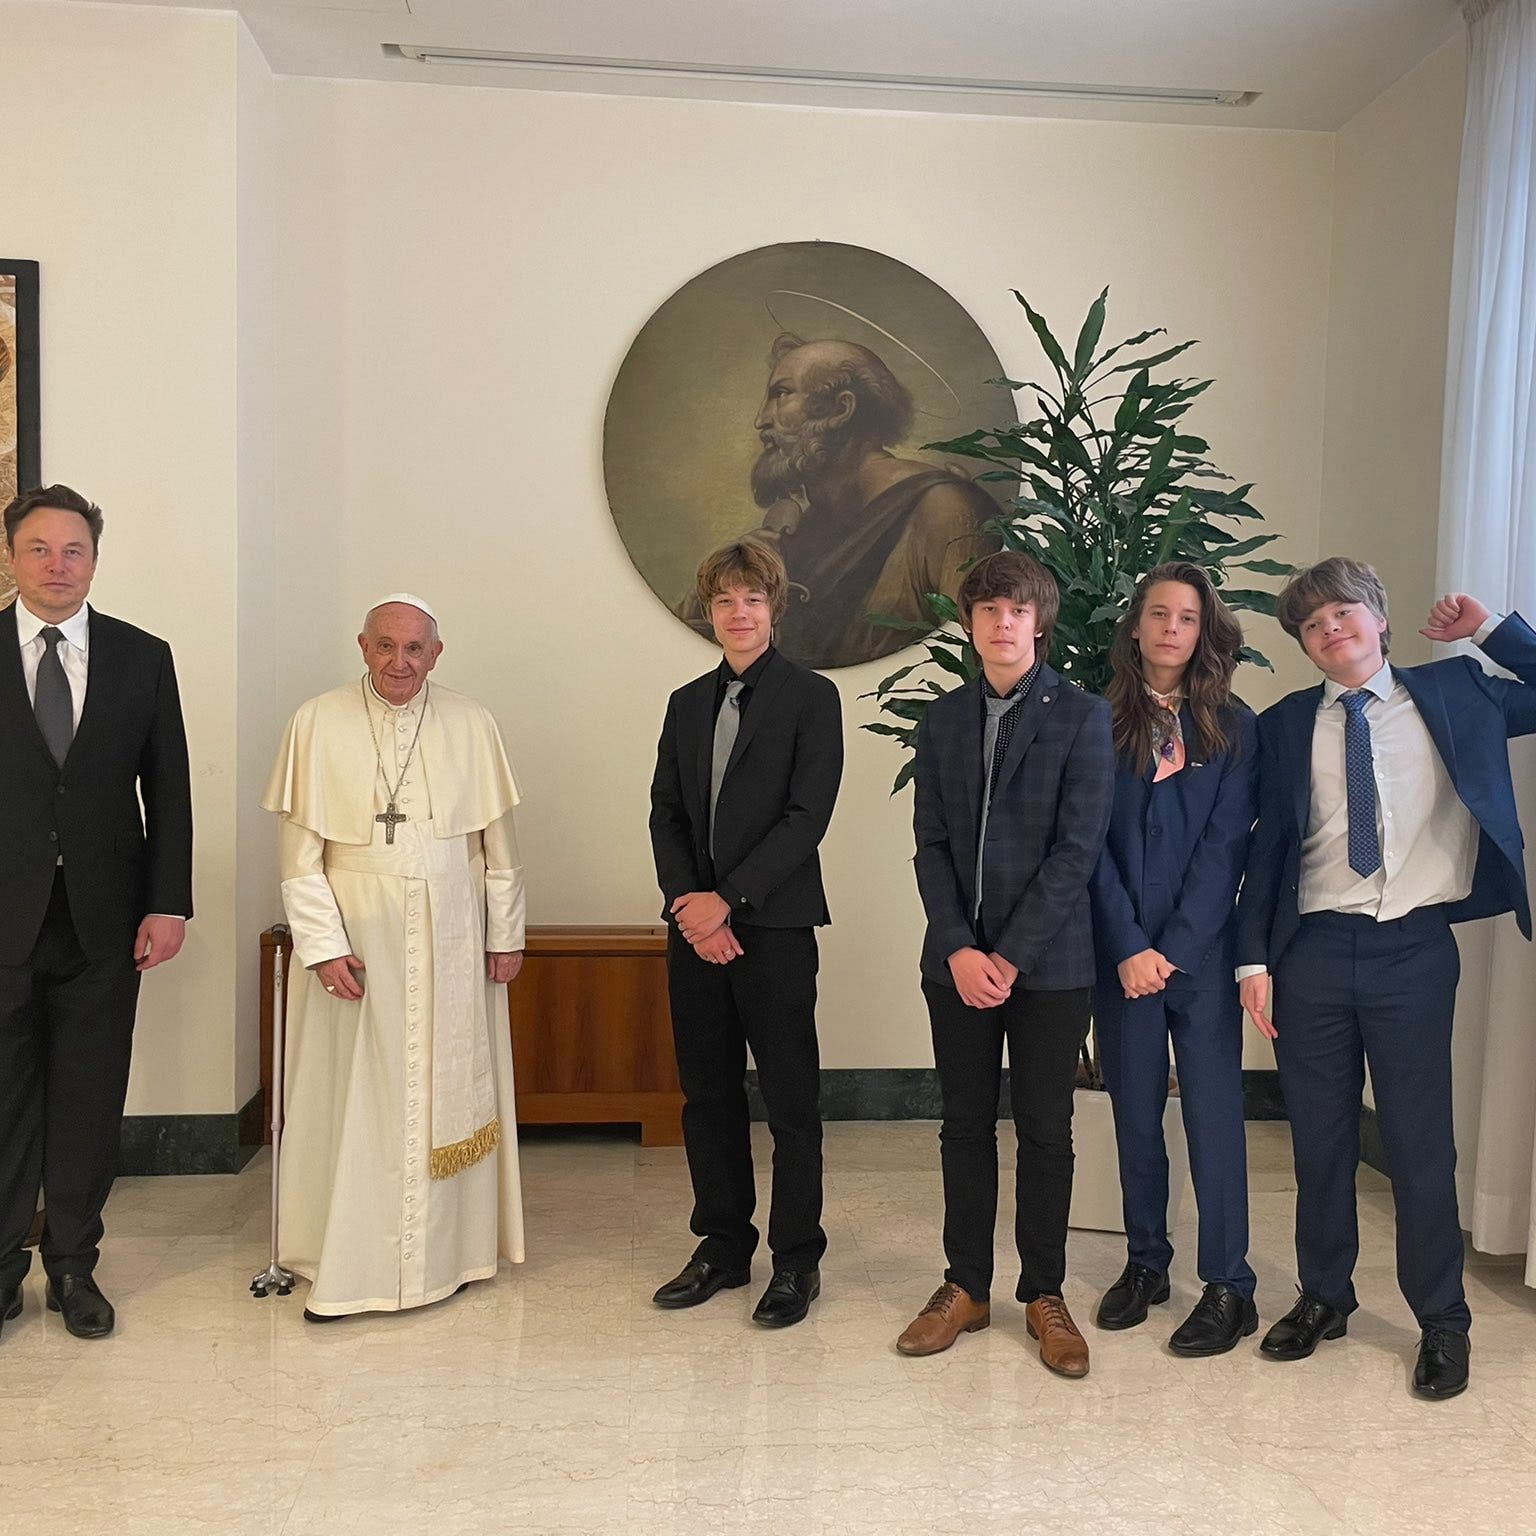 Elon Musk uses Twitter to announce meeting with Pope